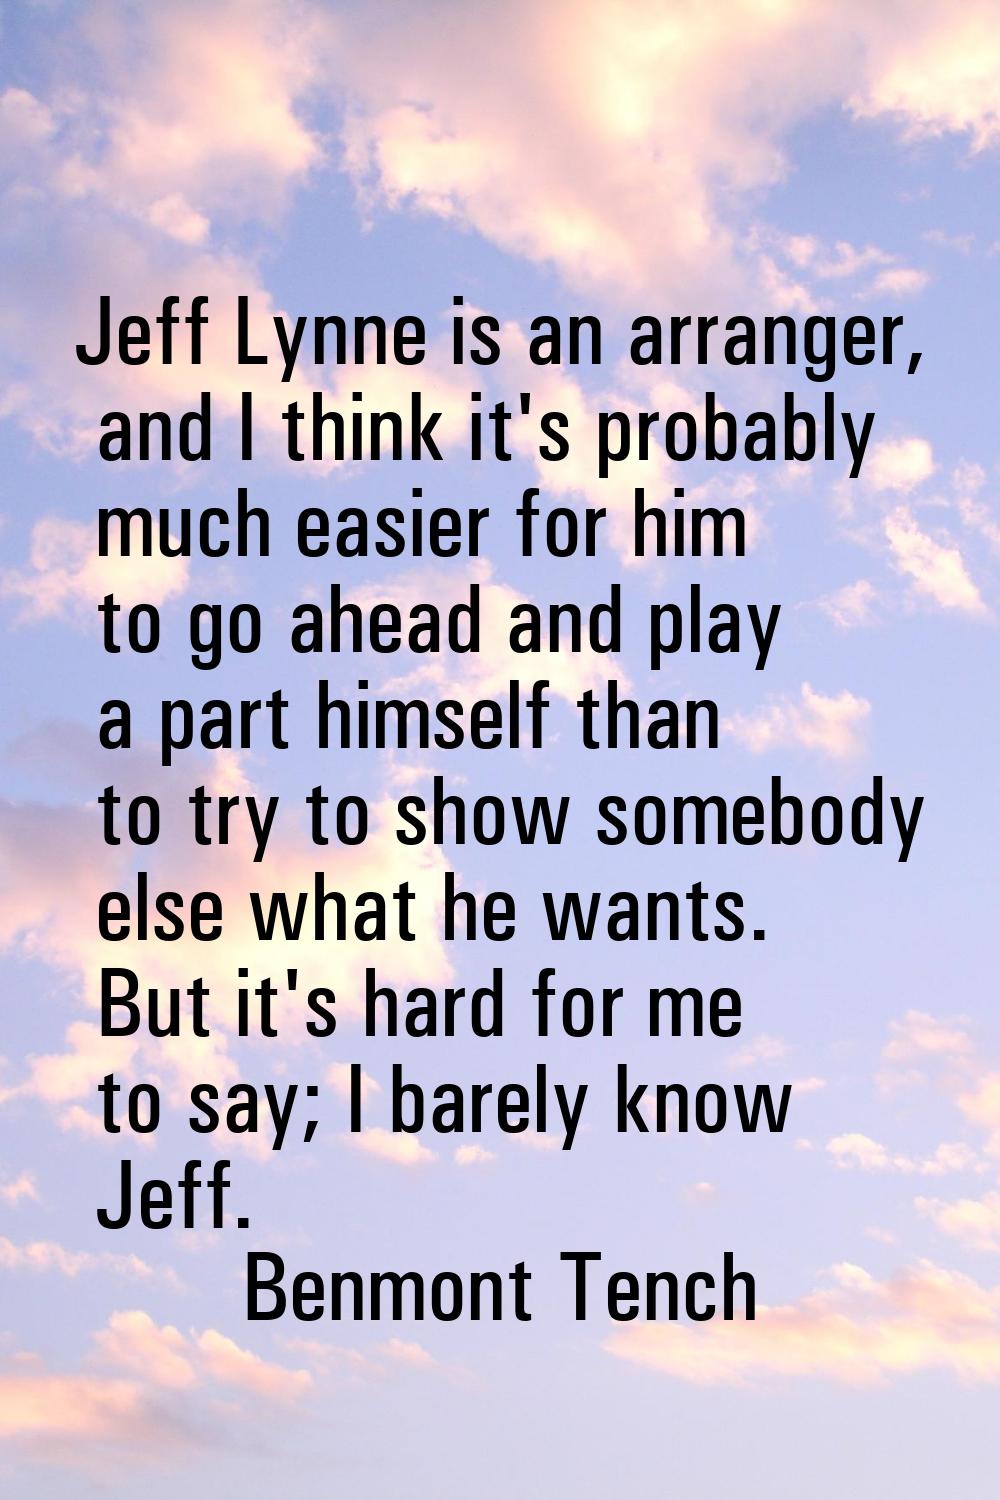 Jeff Lynne is an arranger, and I think it's probably much easier for him to go ahead and play a par